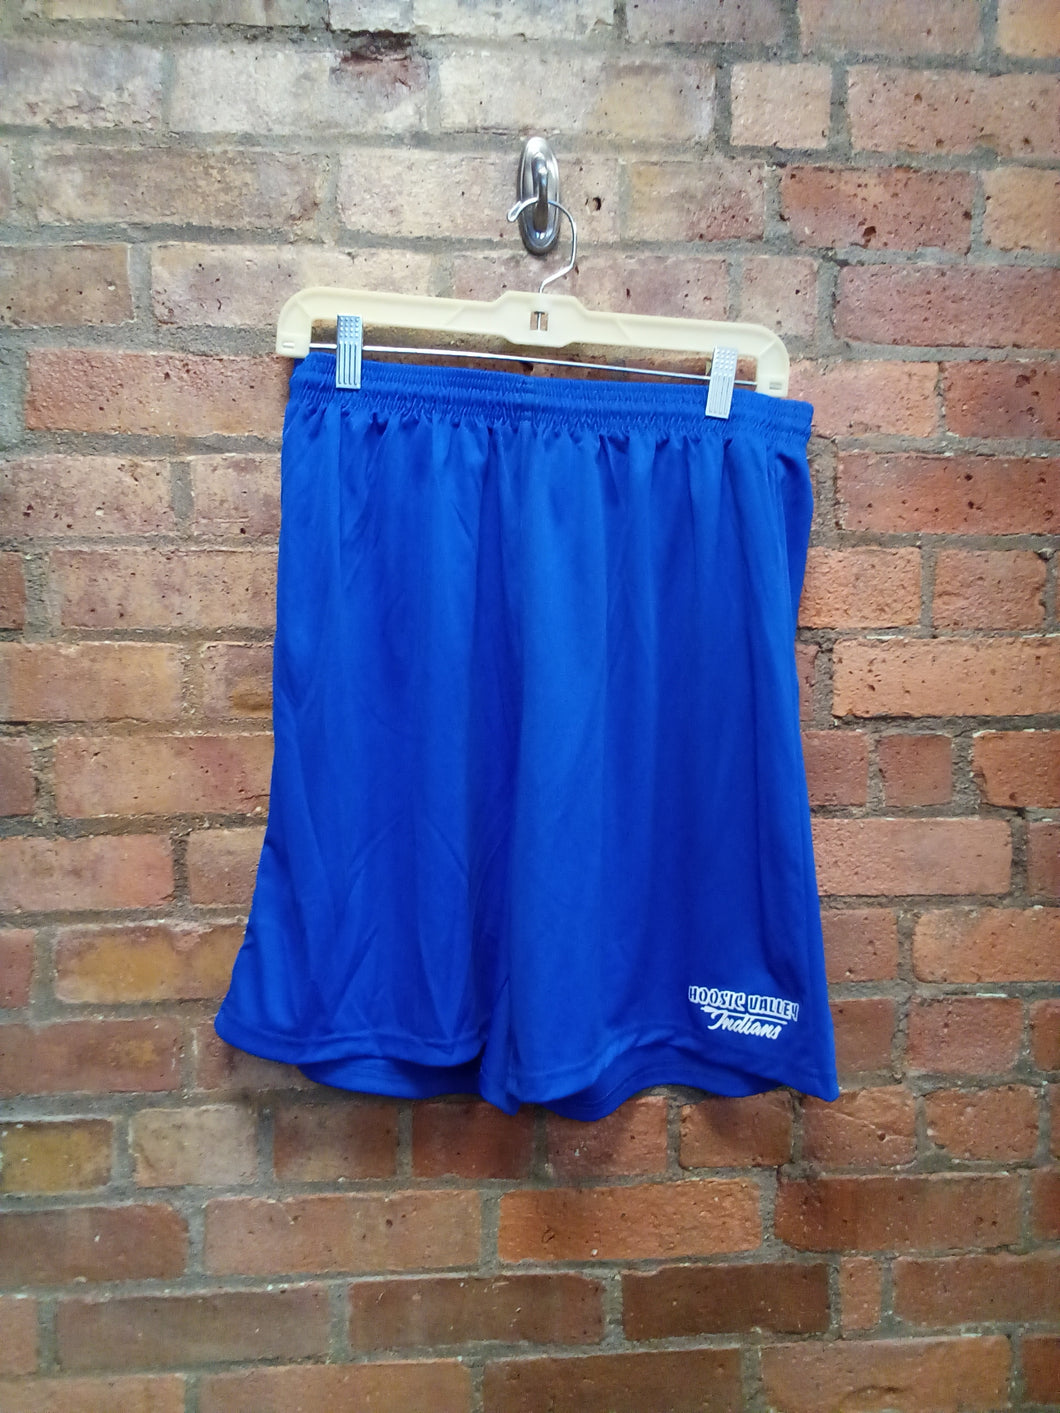 CLEARANCE - Hoosic Valley Gym Shorts - Size Large